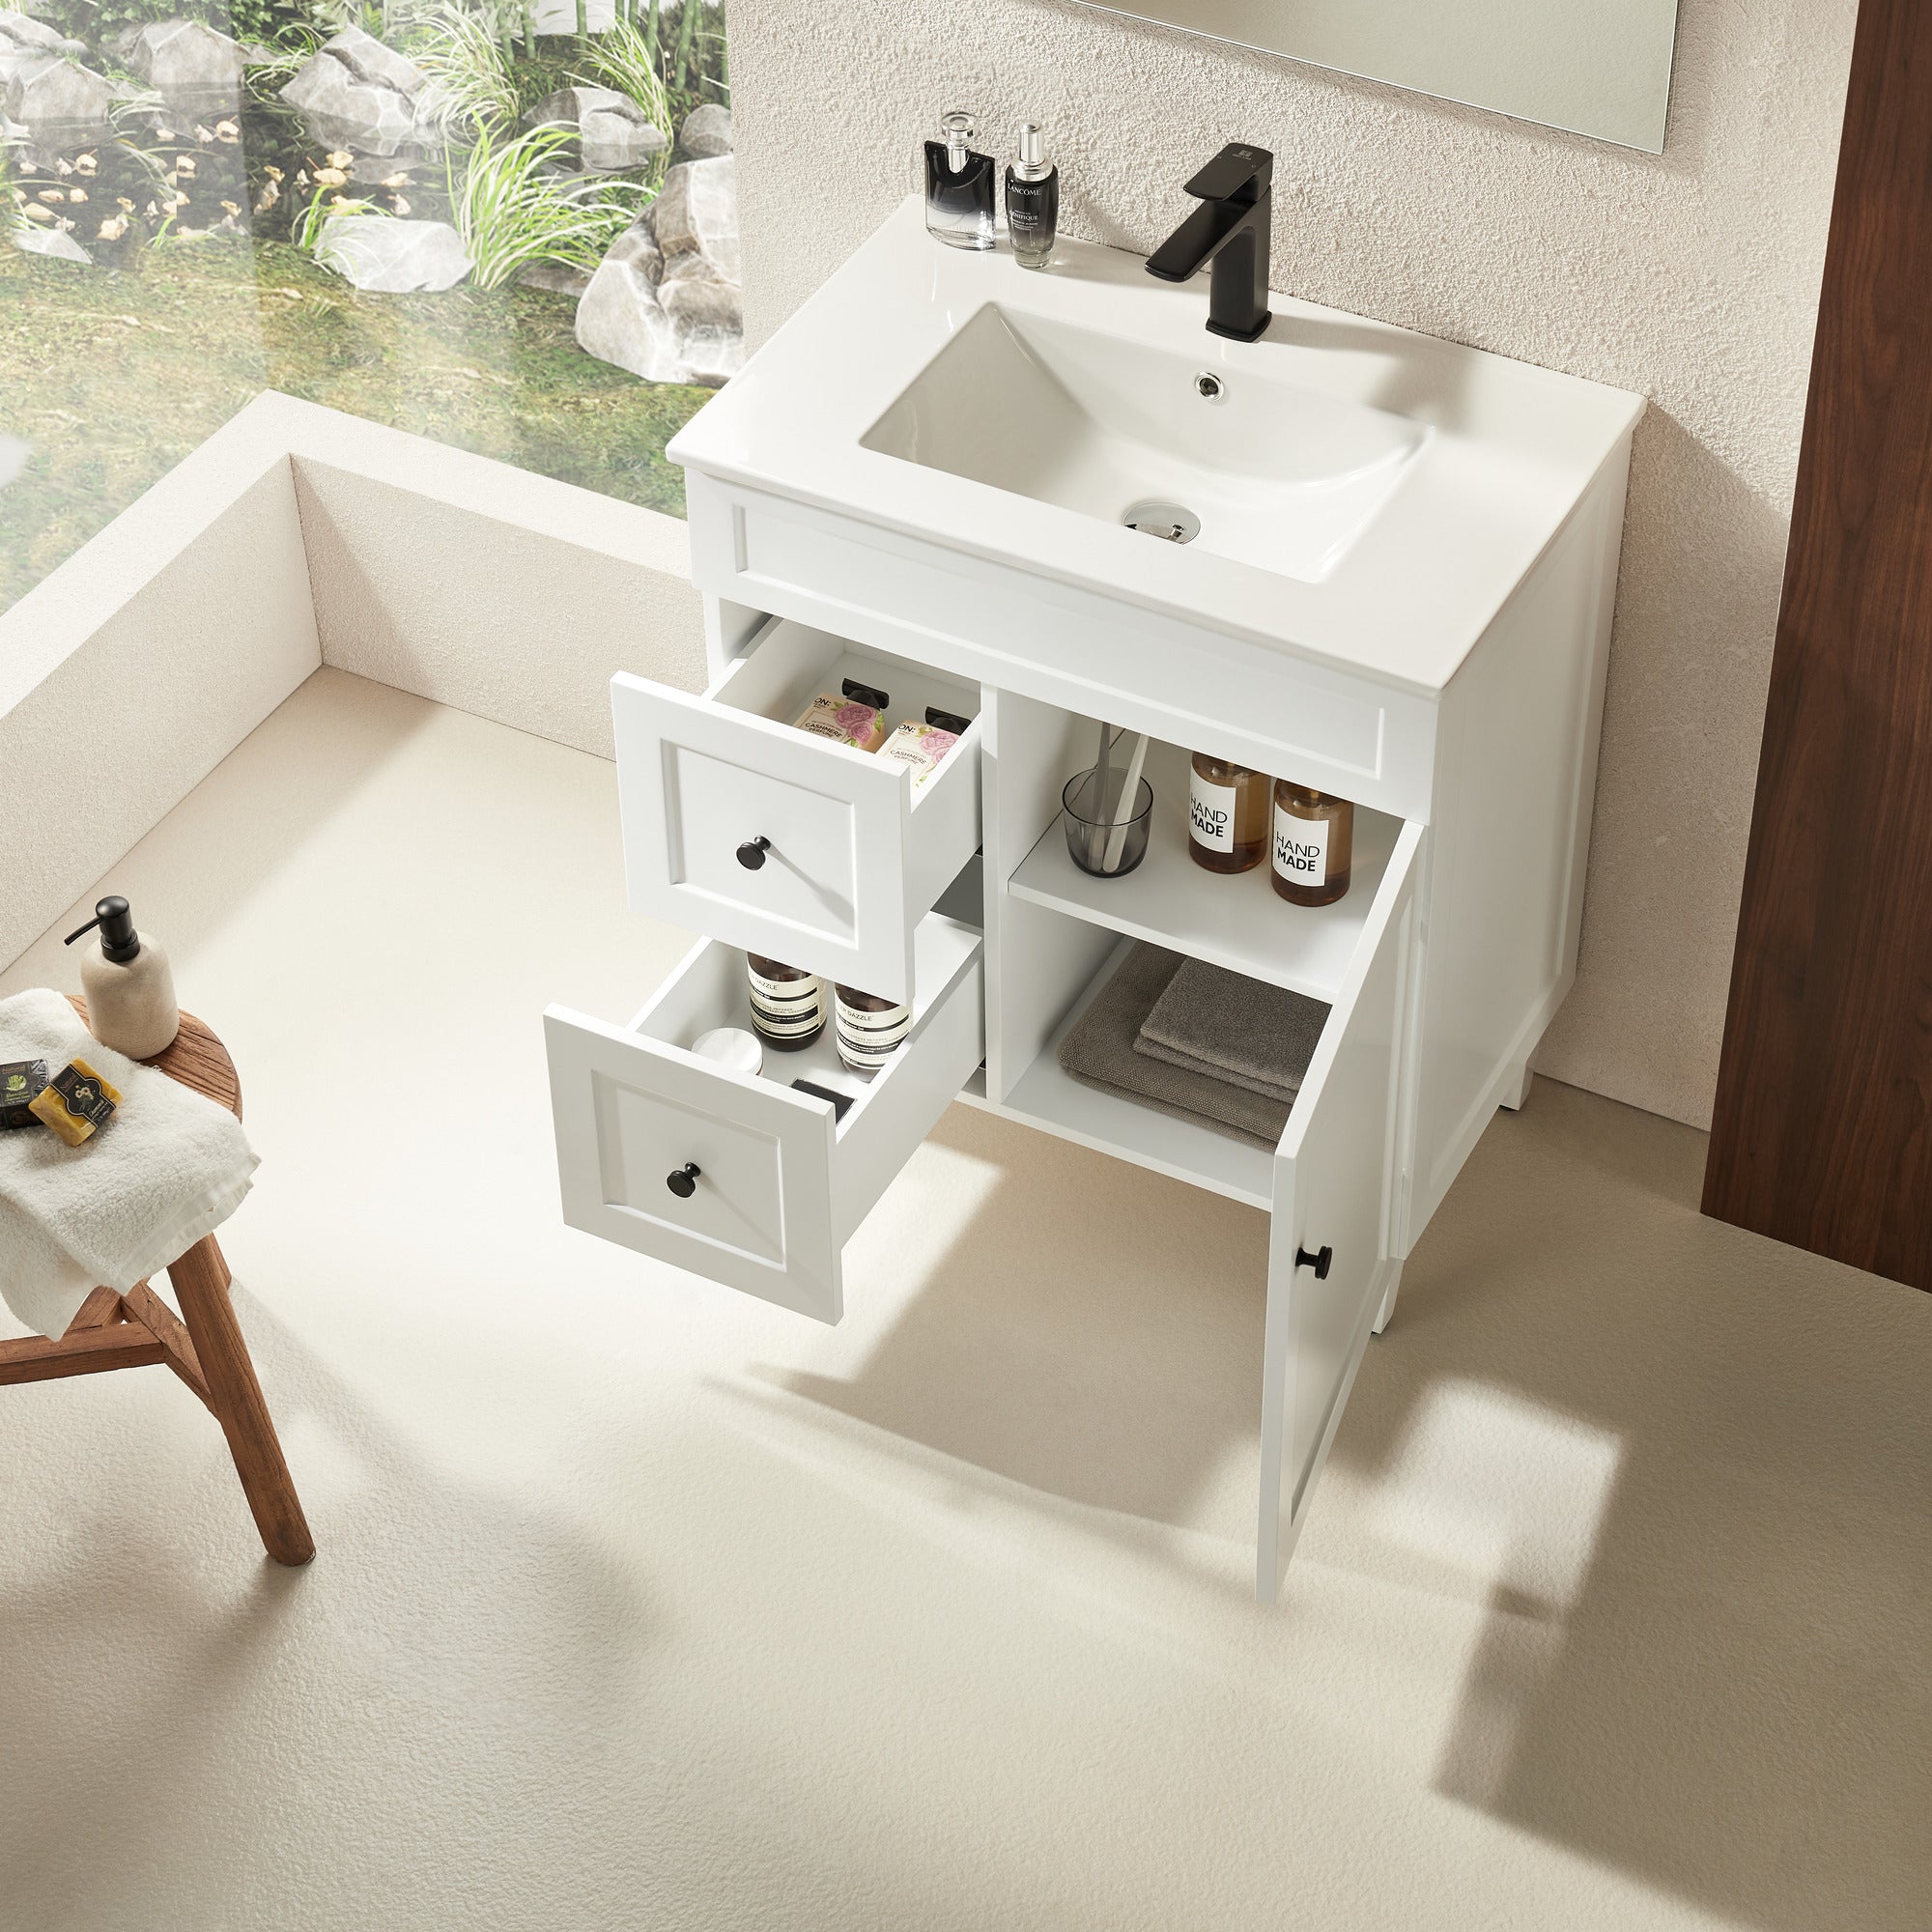 CETO HARRINGTON MATTE WHITE 750MM SINGLE BOWL FLOOR STANDING VANITY (AVAILABLE IN LEFT AND RIGHT HAND DRAWER)